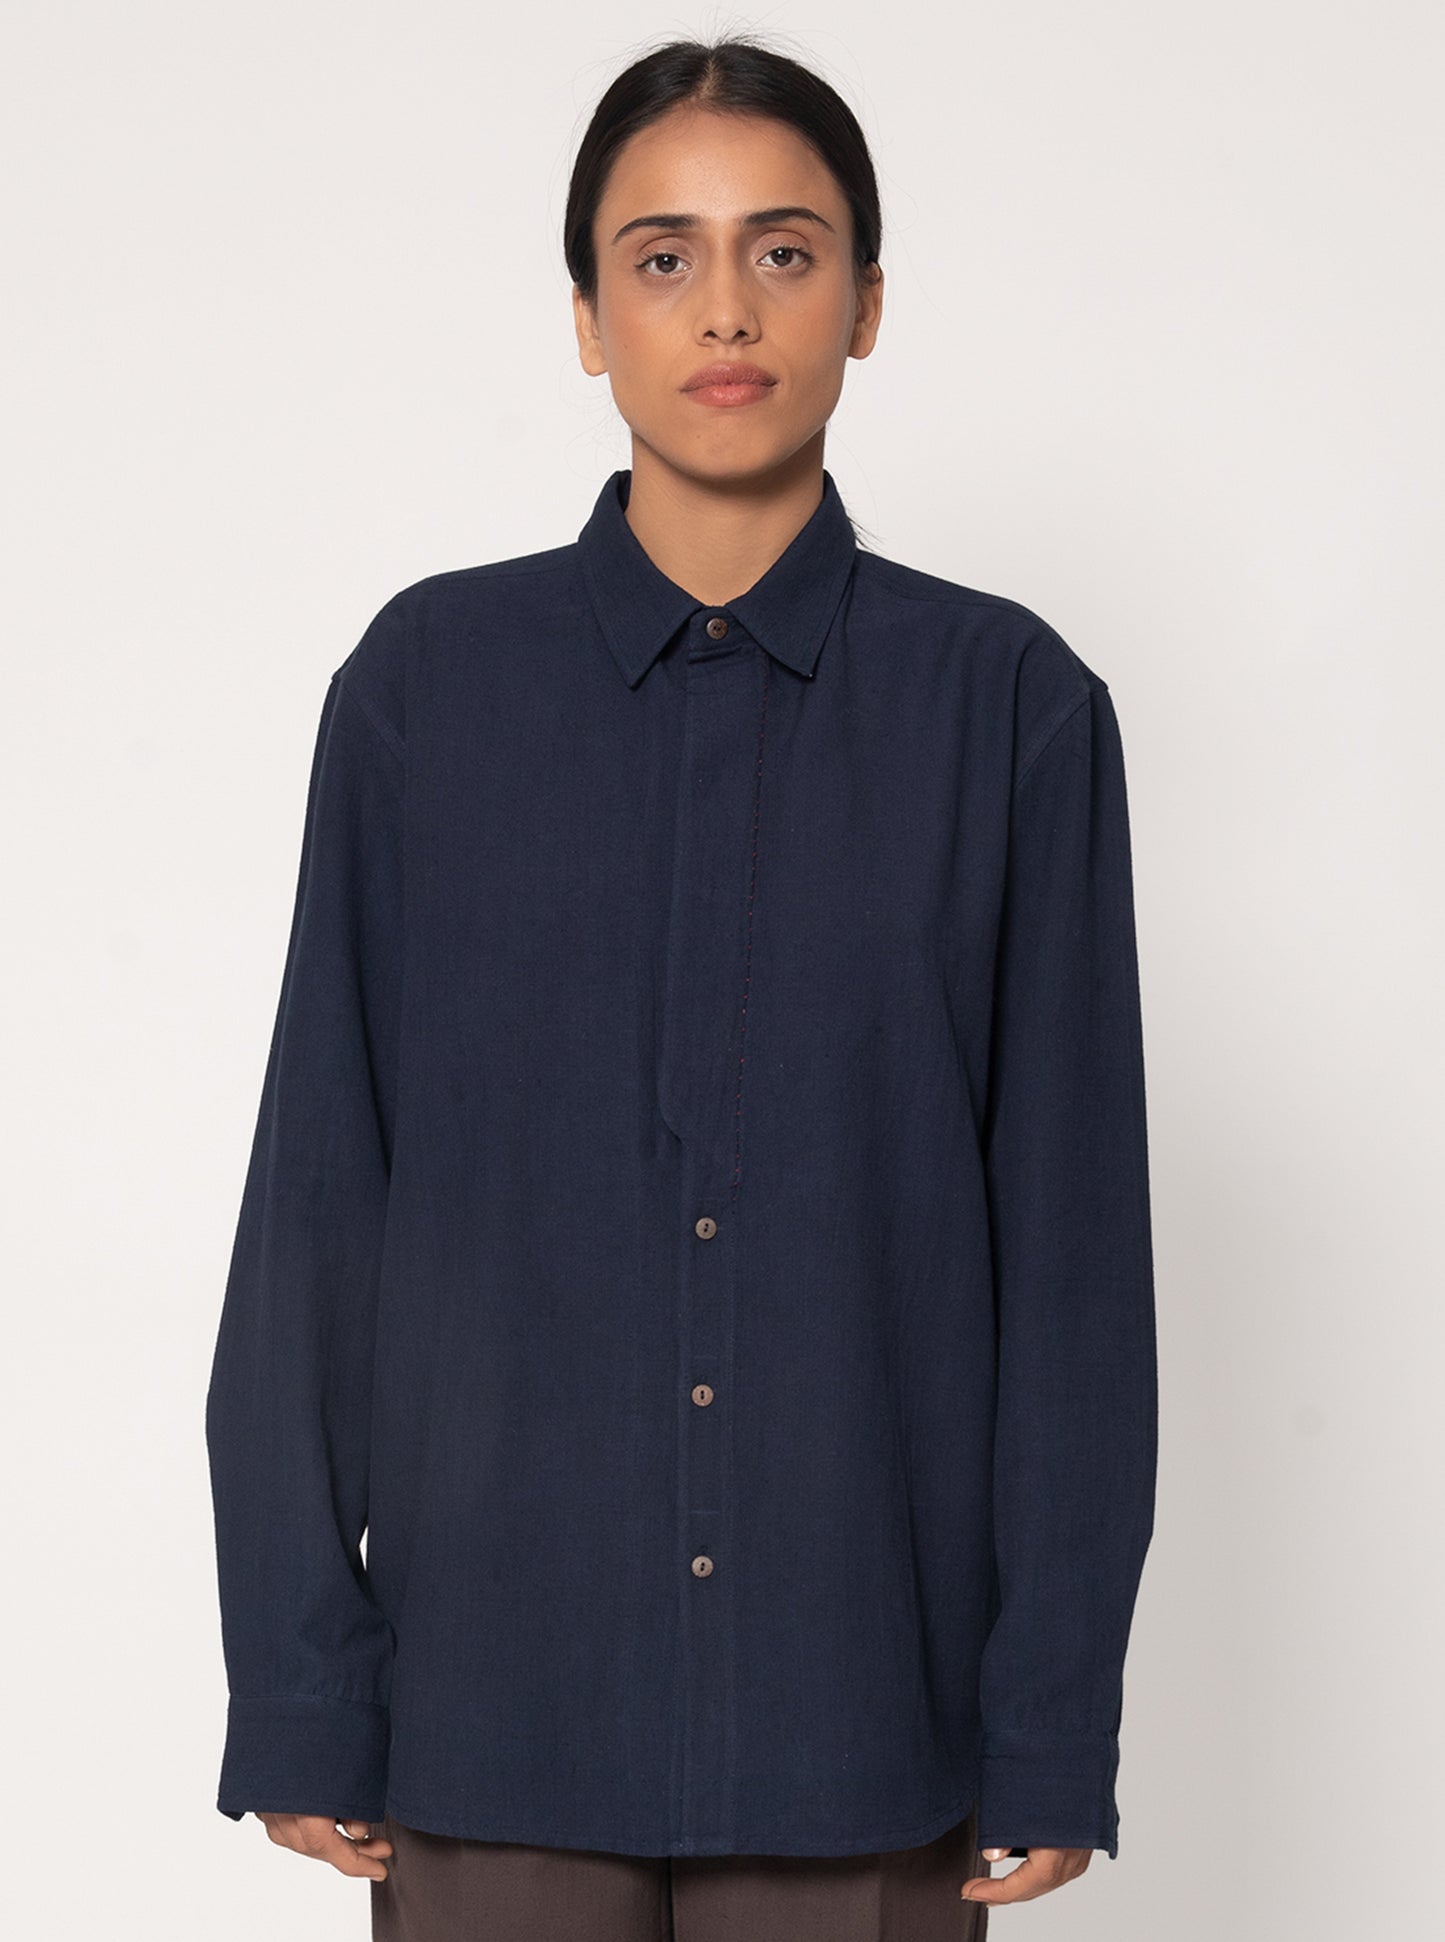 Structured Placket Casual Shirt